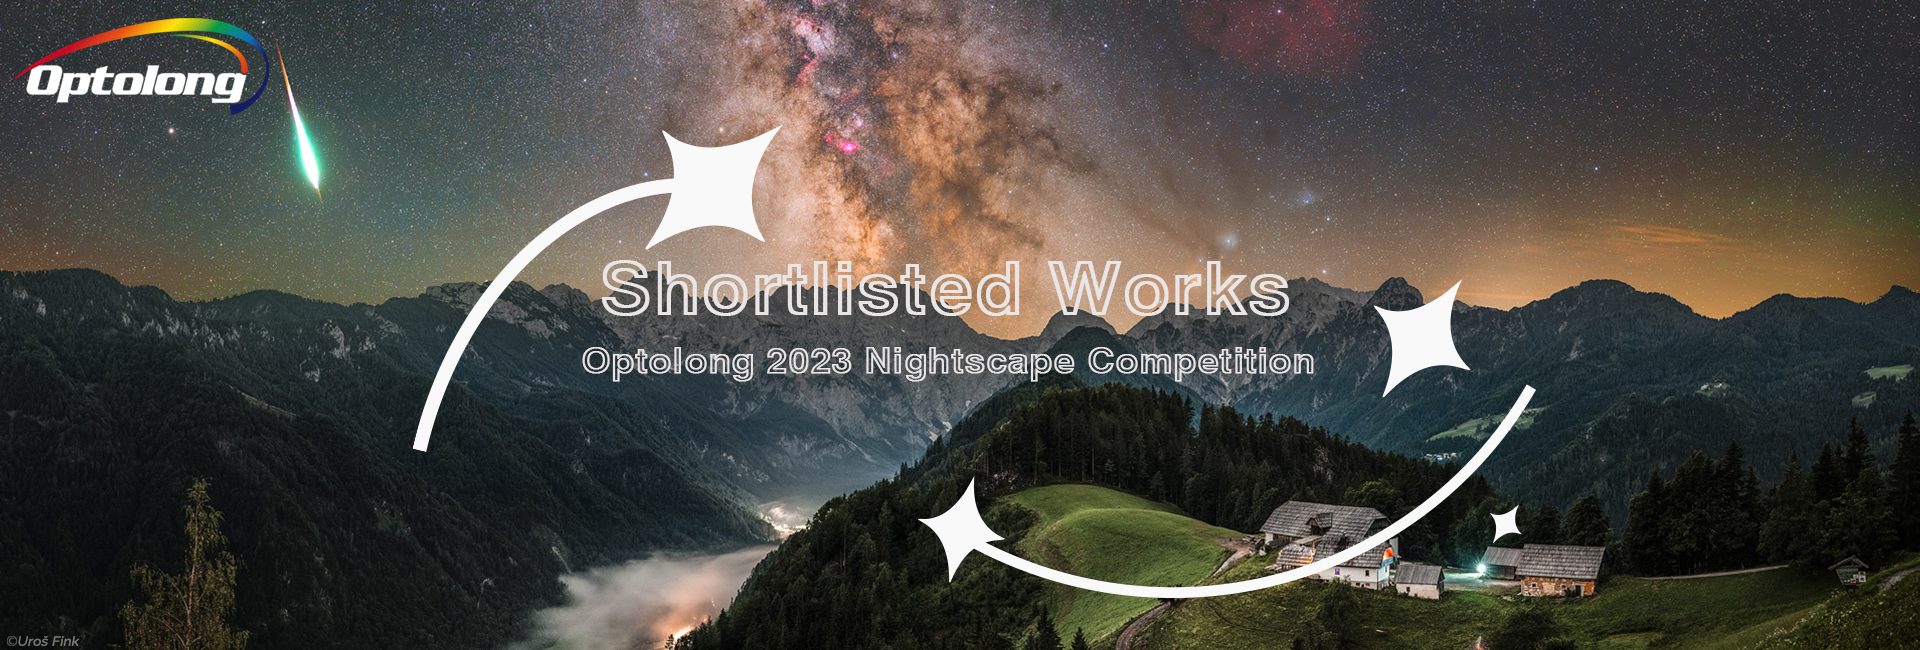 Shortlist of Optolong 2023 Nightscape Competition was announced 